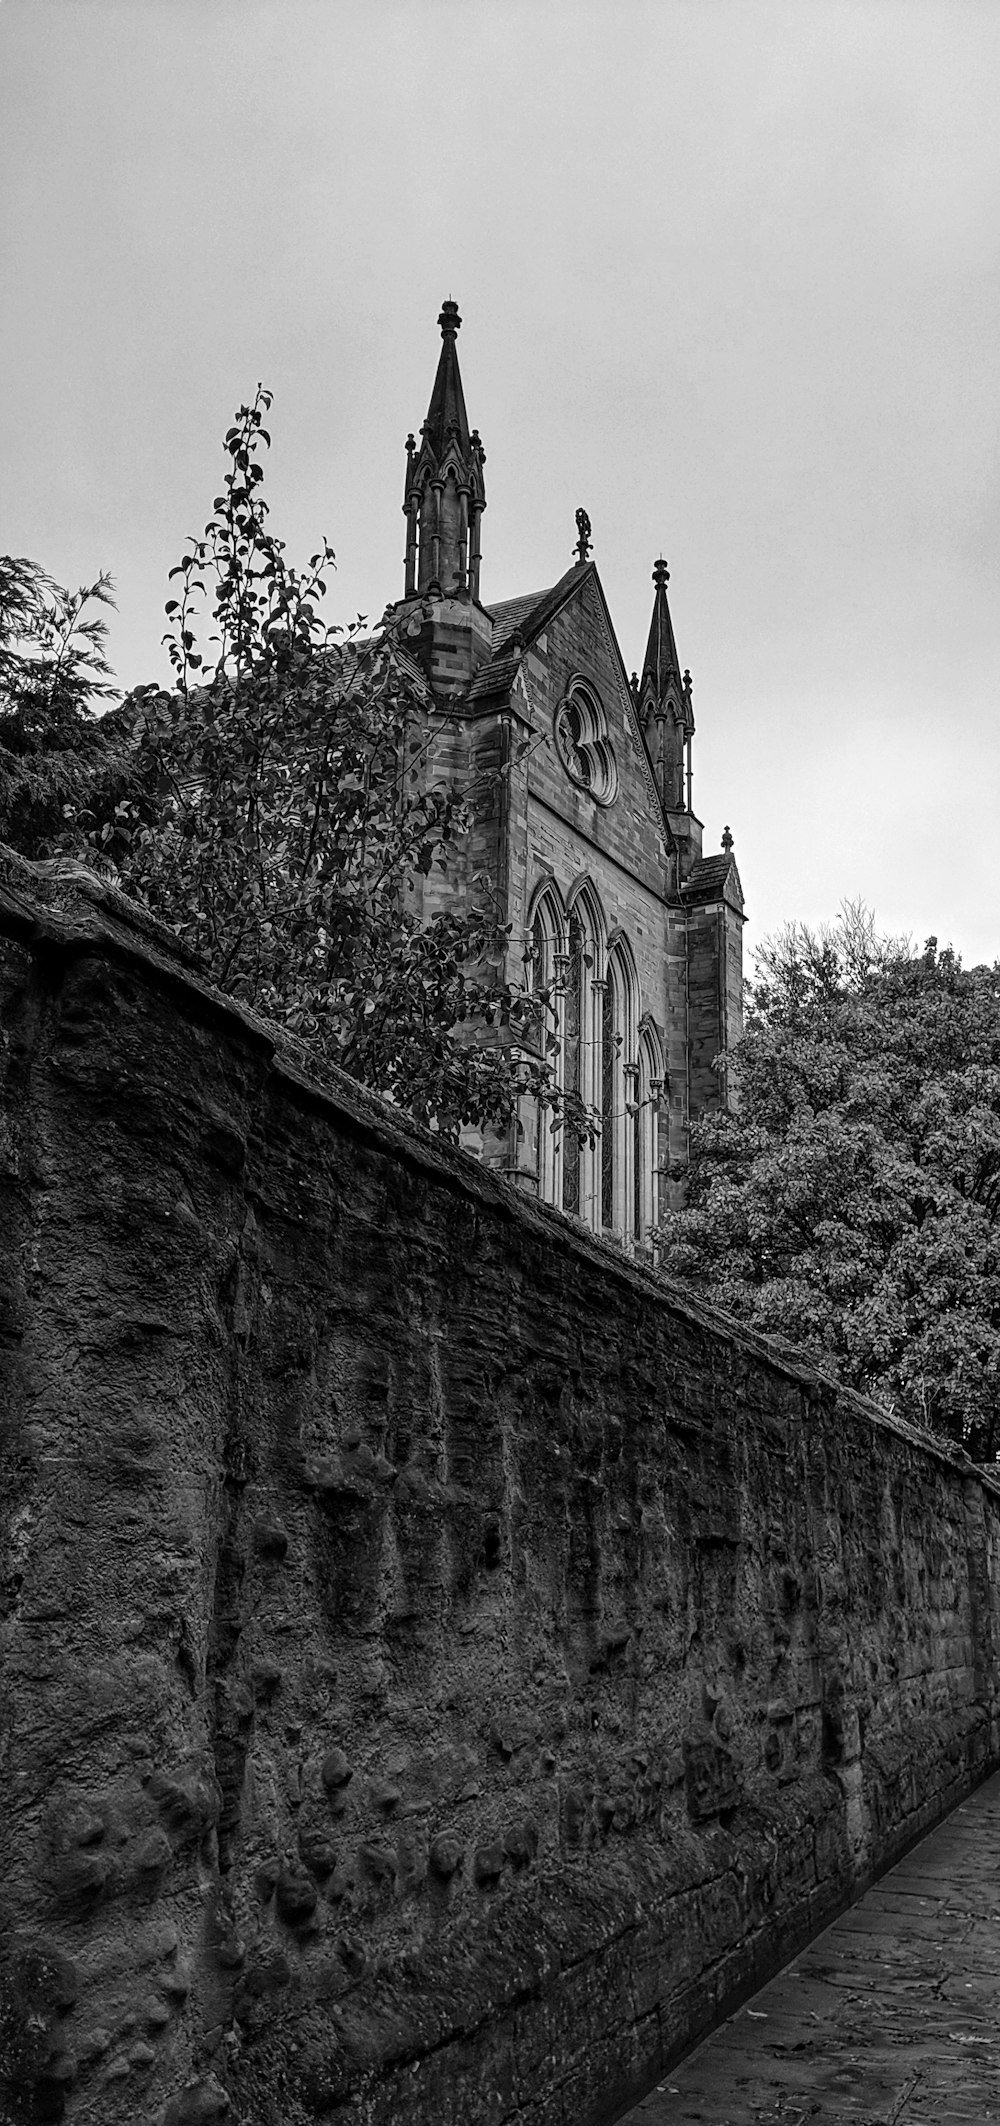 grayscale photography of a cathedral building